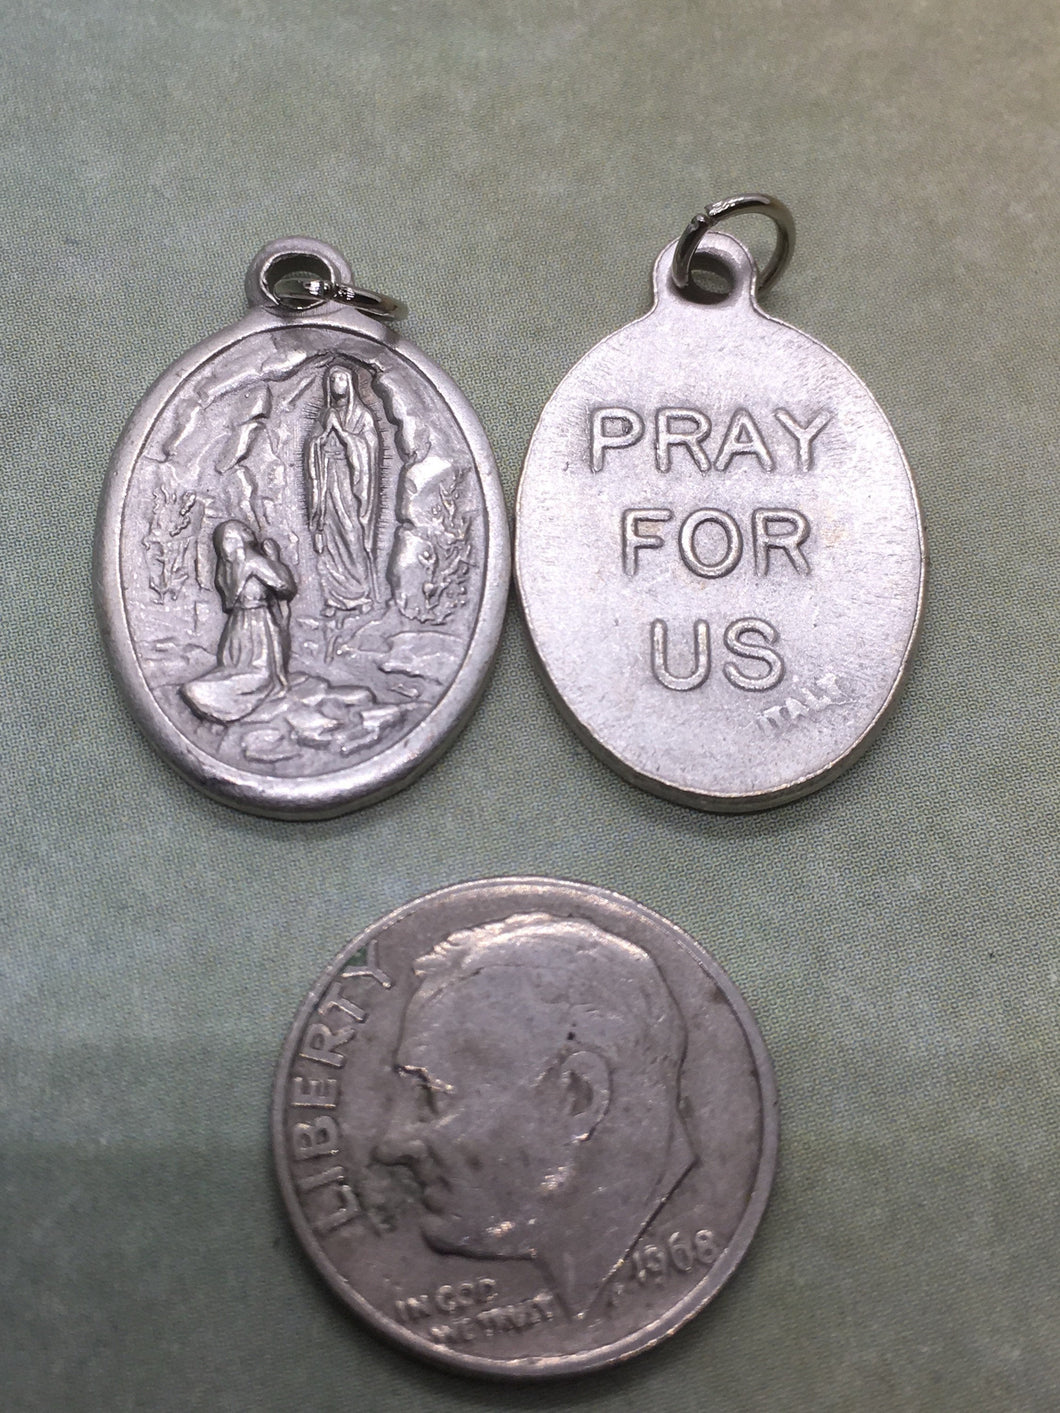 Our Lady of Lourdes (1858) holy medal